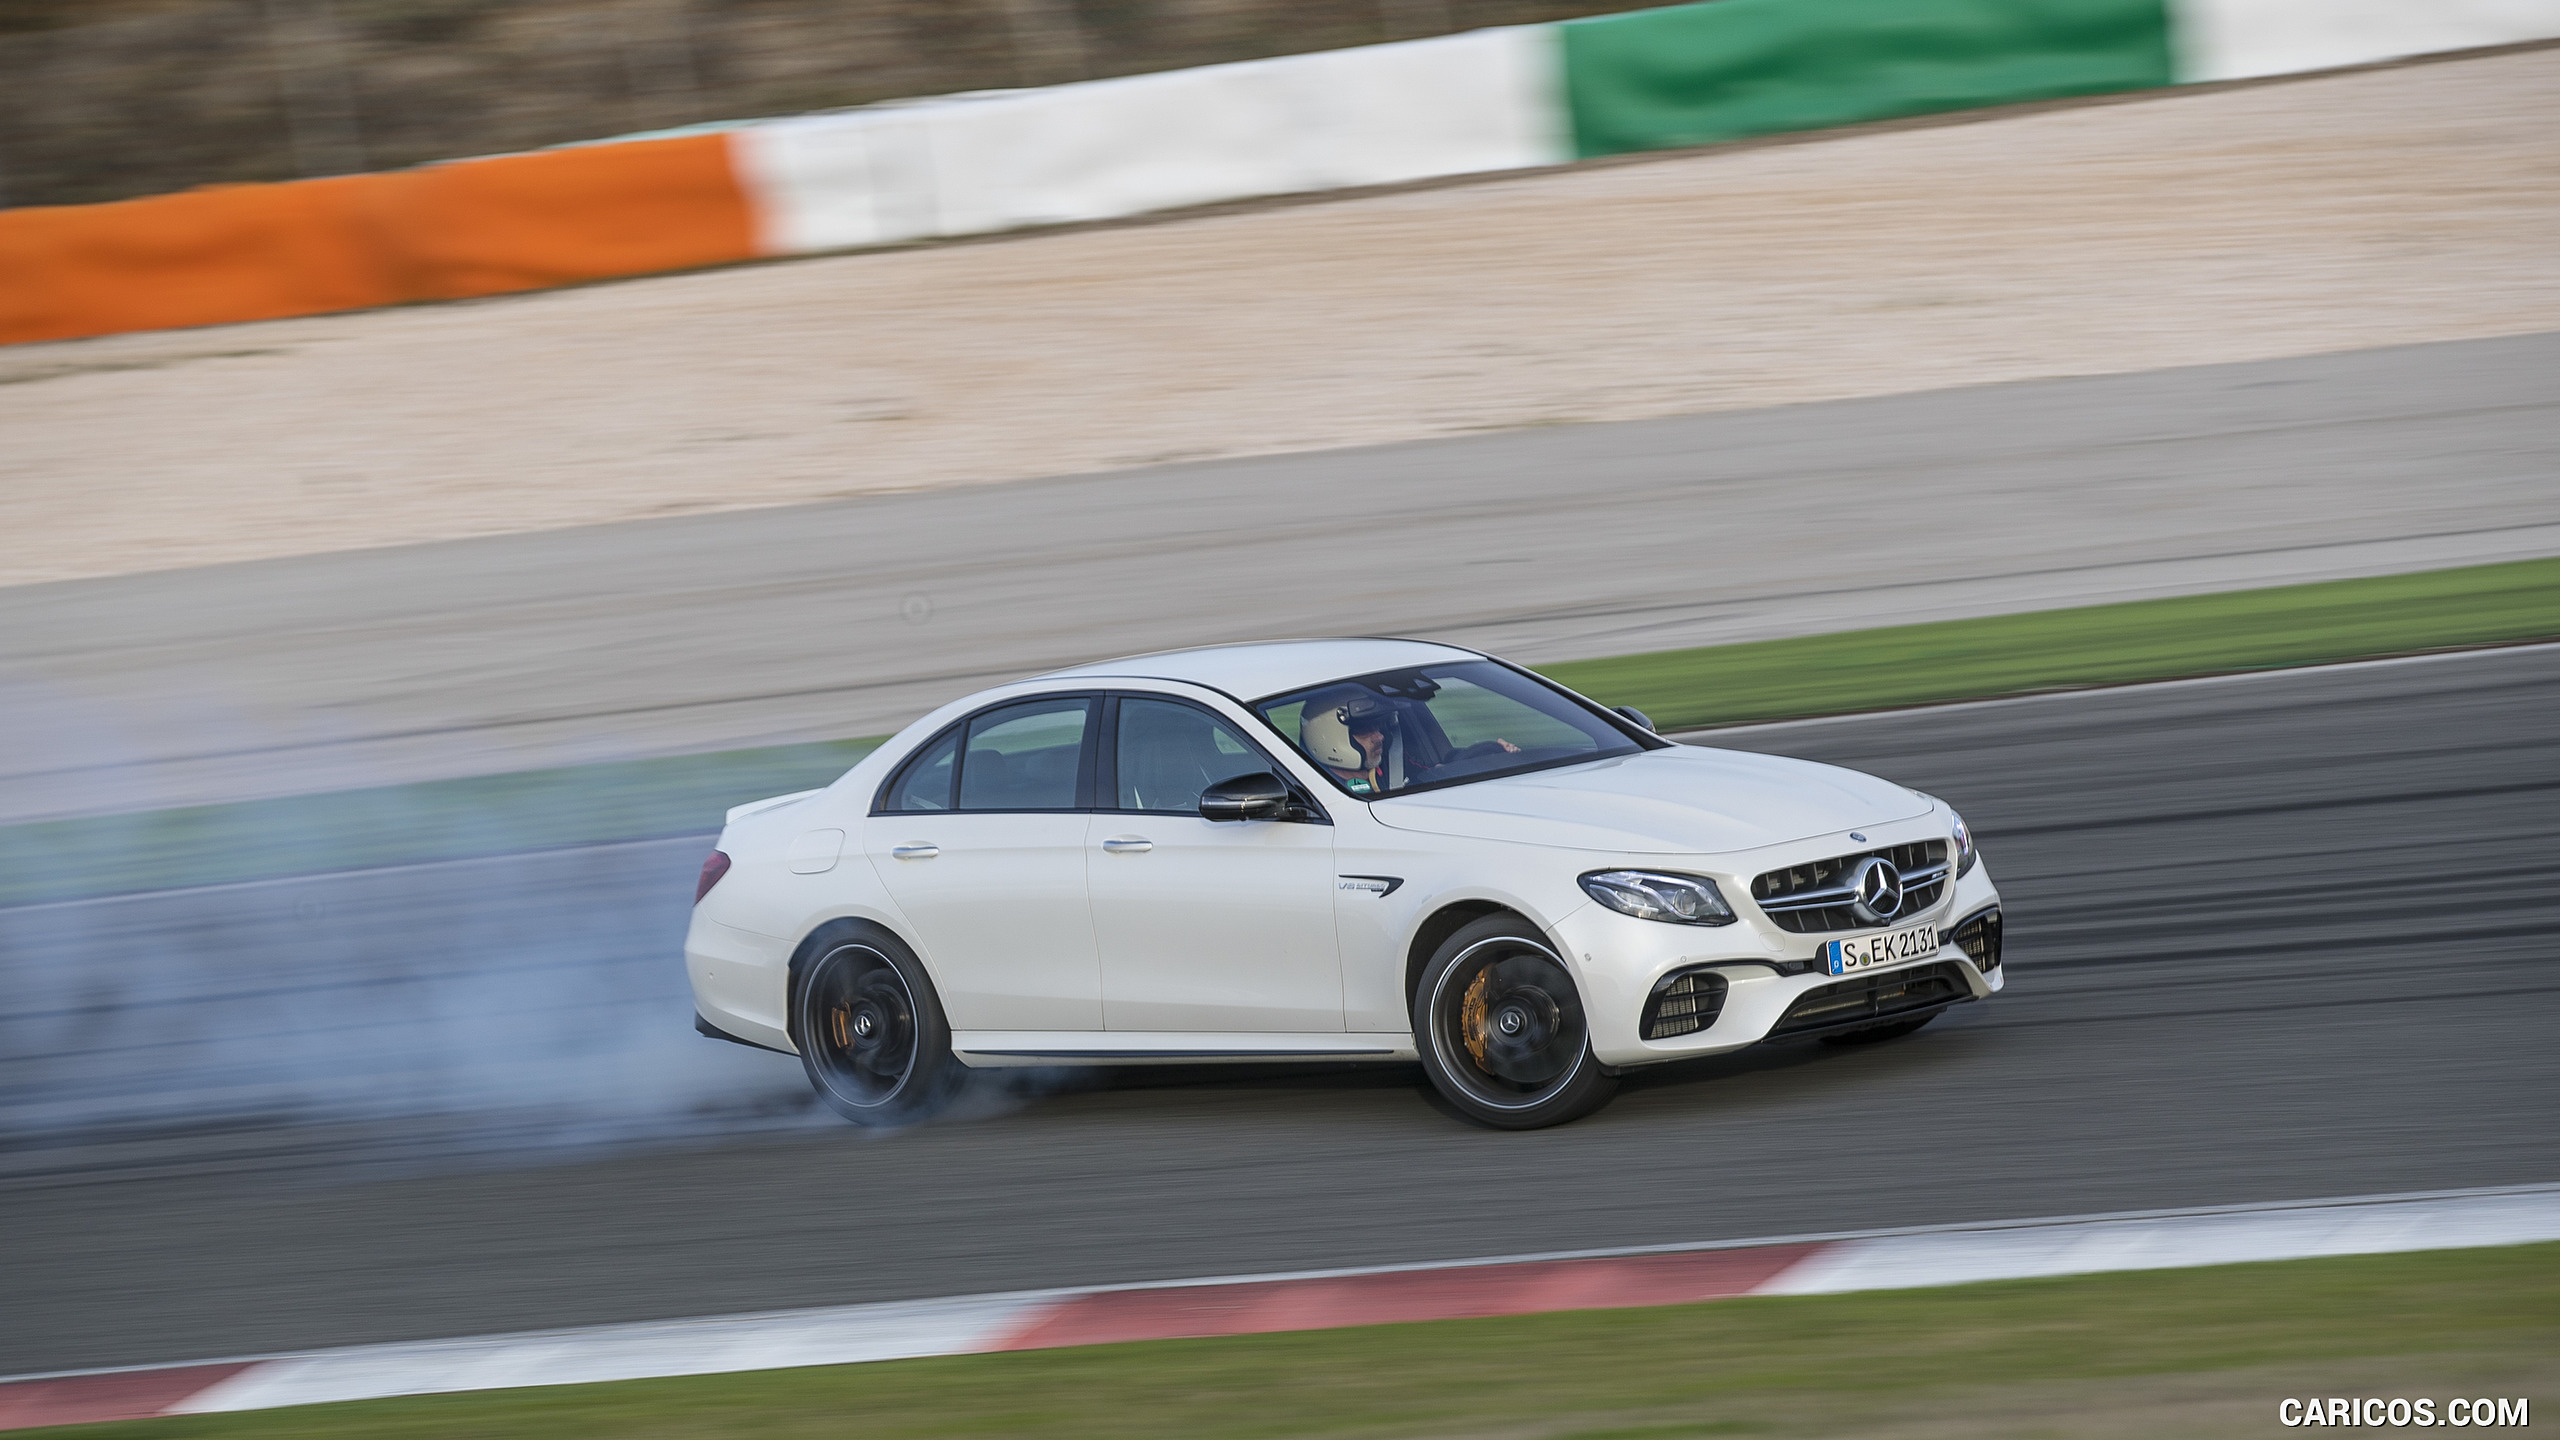 2018 Mercedes-AMG E63 S 4MATIC+ - Side, #114 of 323